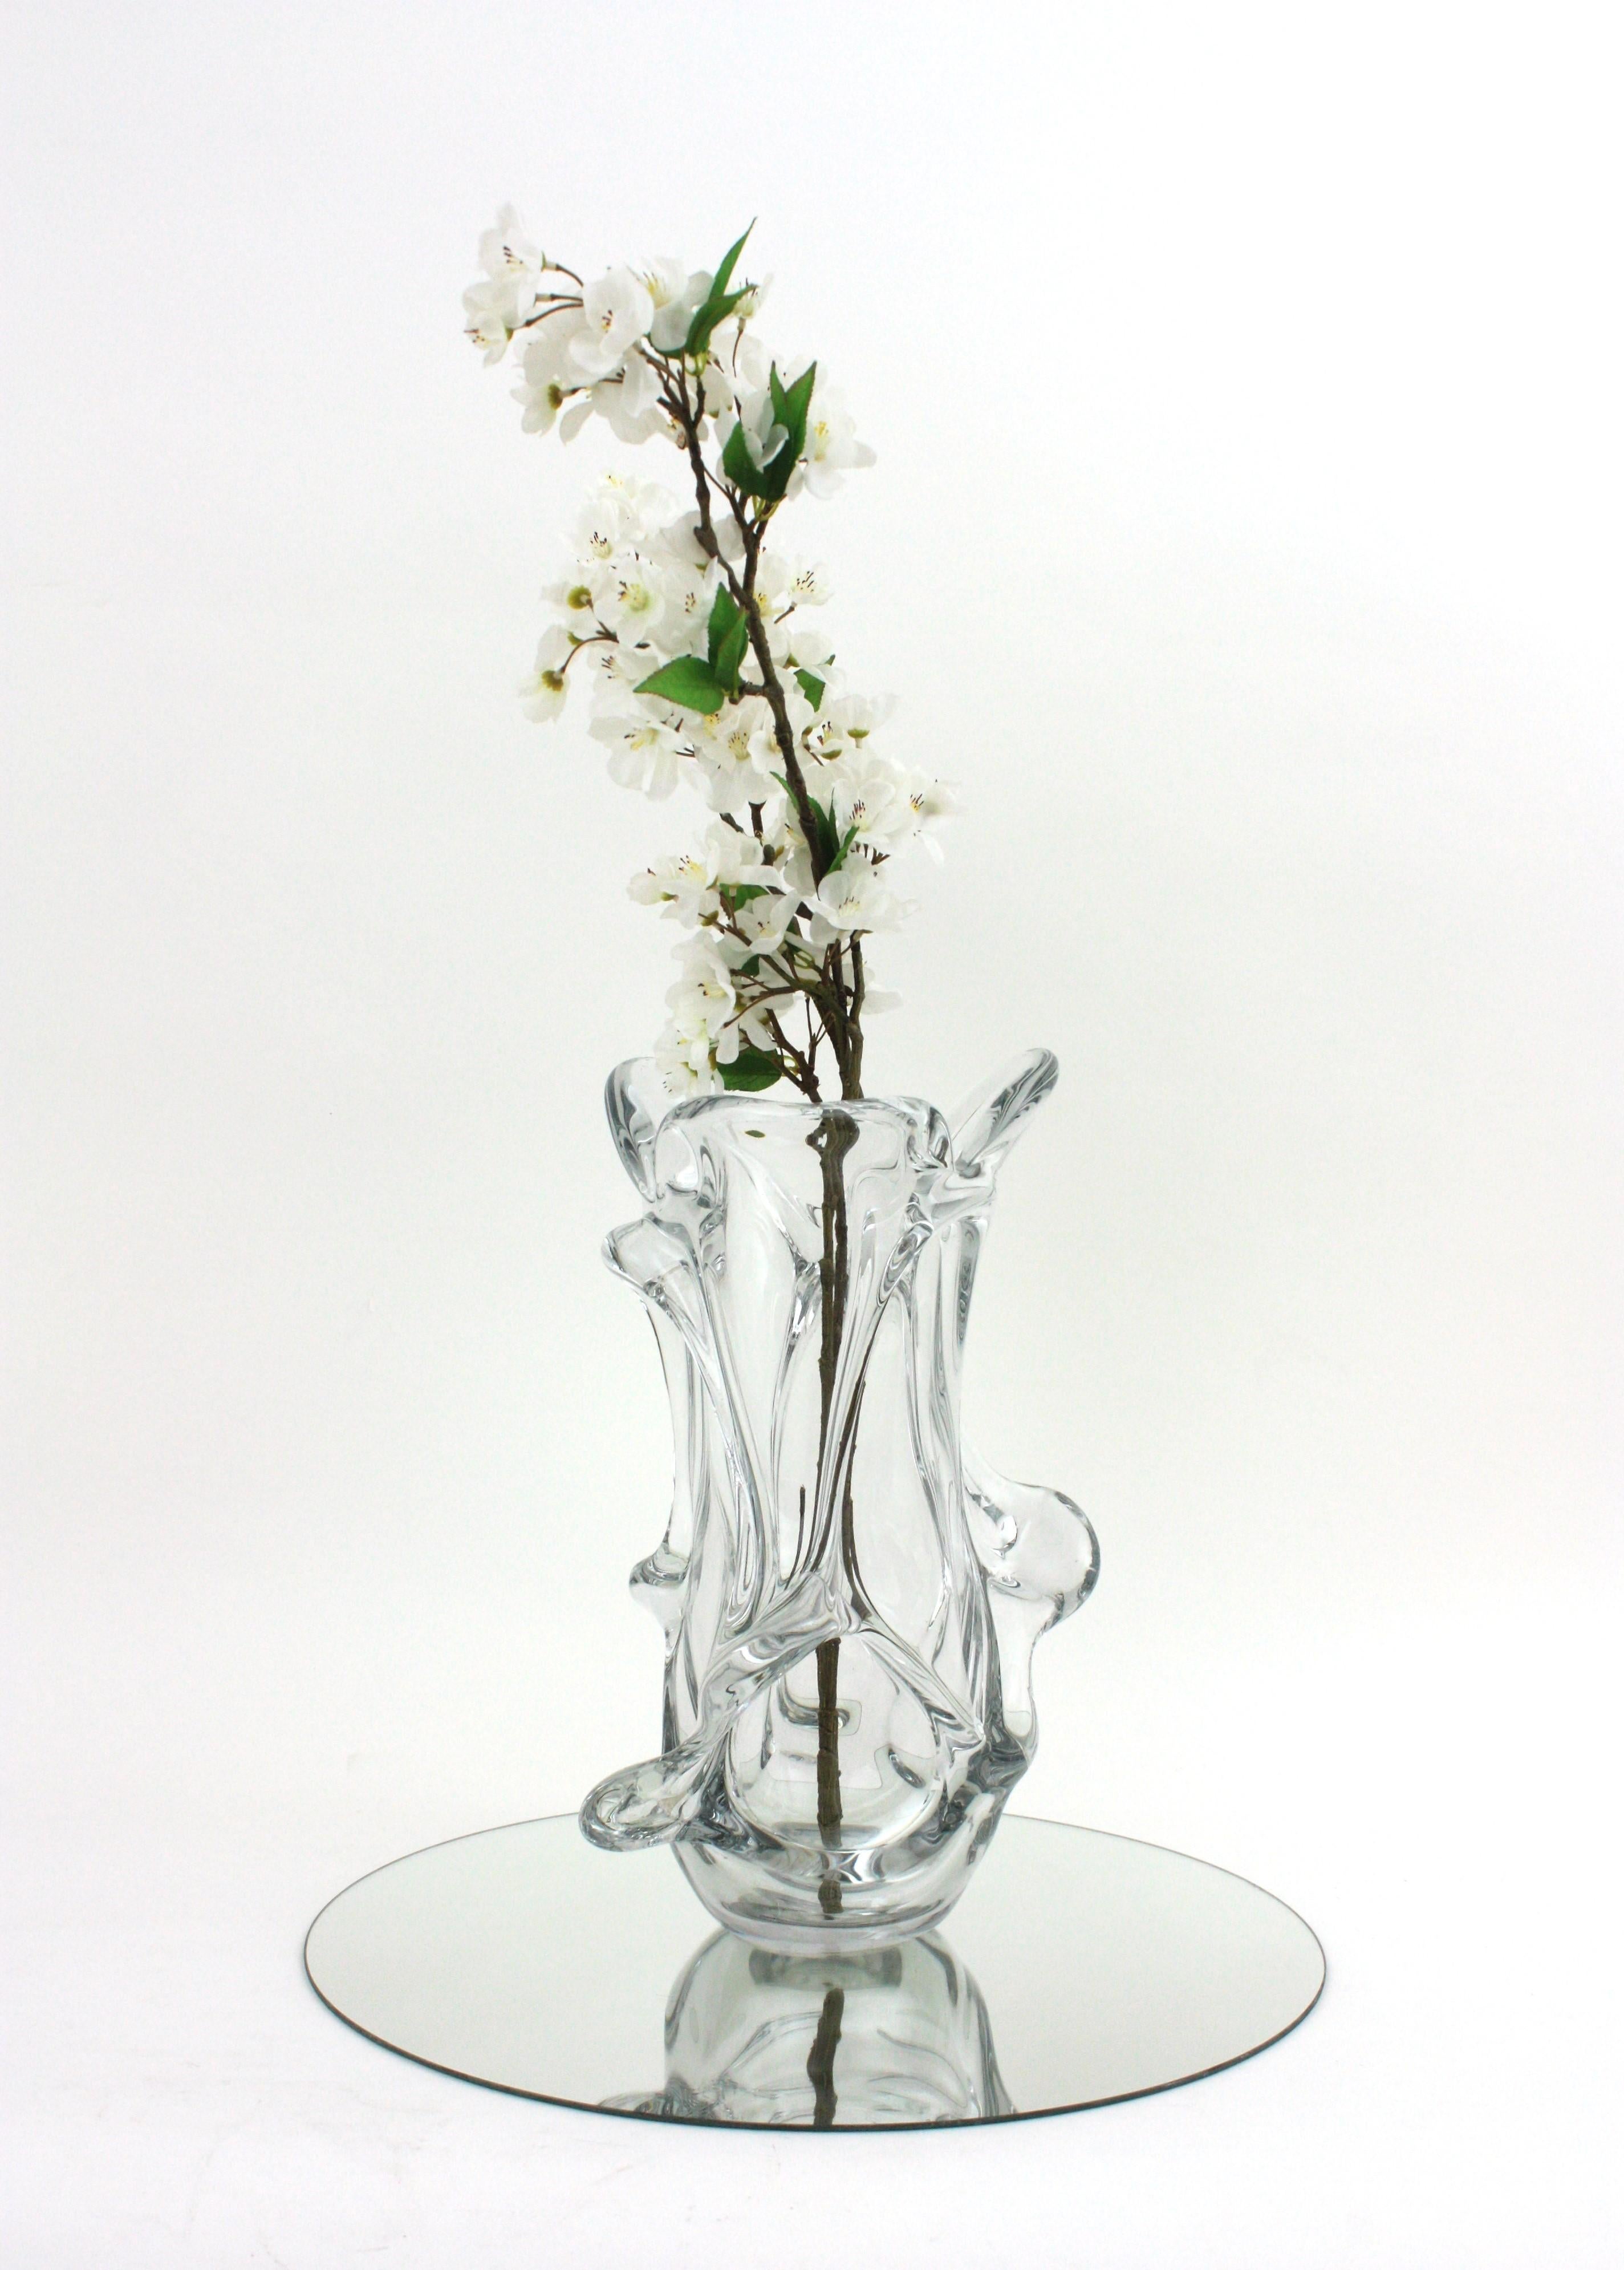 Large Murano Organic Shaped Vase in Clear Glass, 1950s For Sale 6